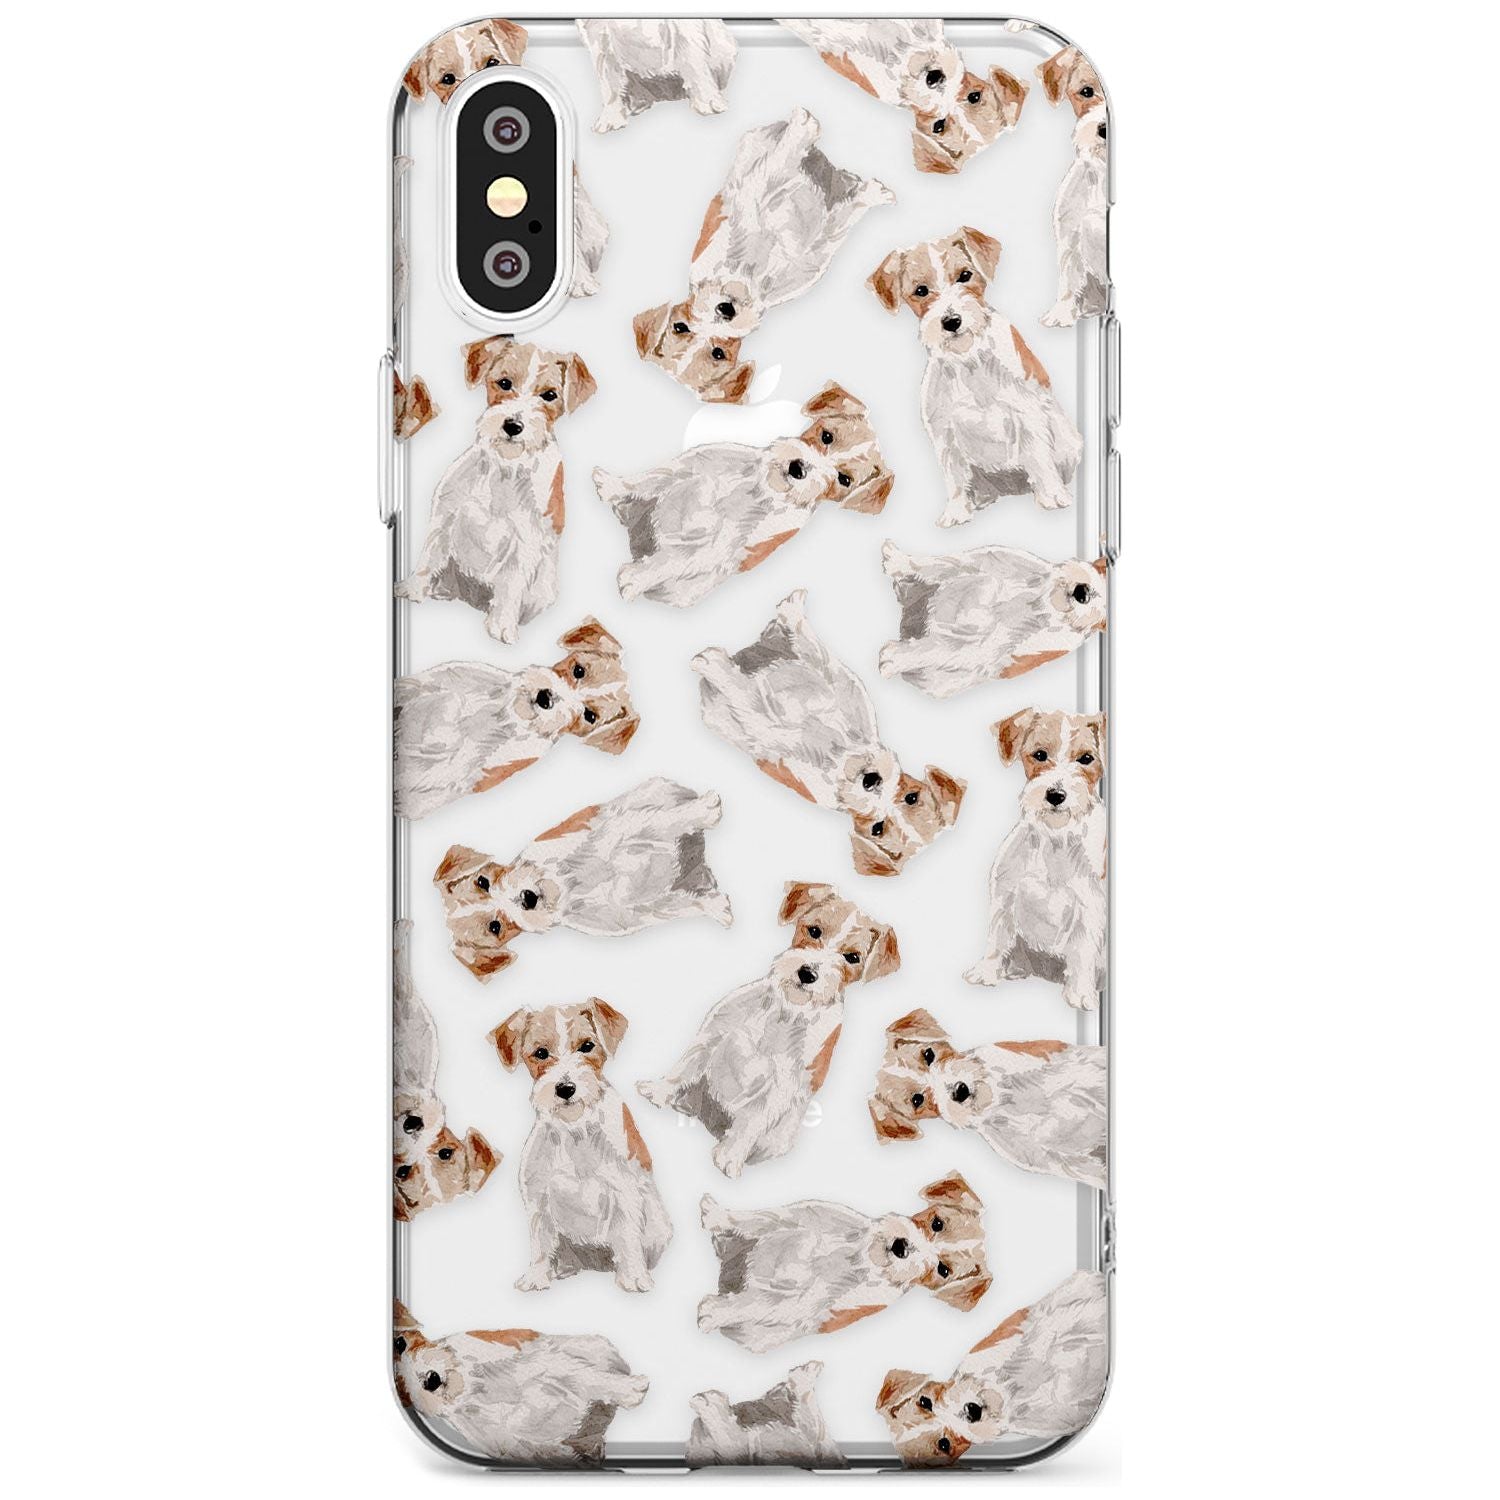 Wirehaired Jack Russell Watercolour Dog Pattern Slim TPU Phone Case Warehouse X XS Max XR